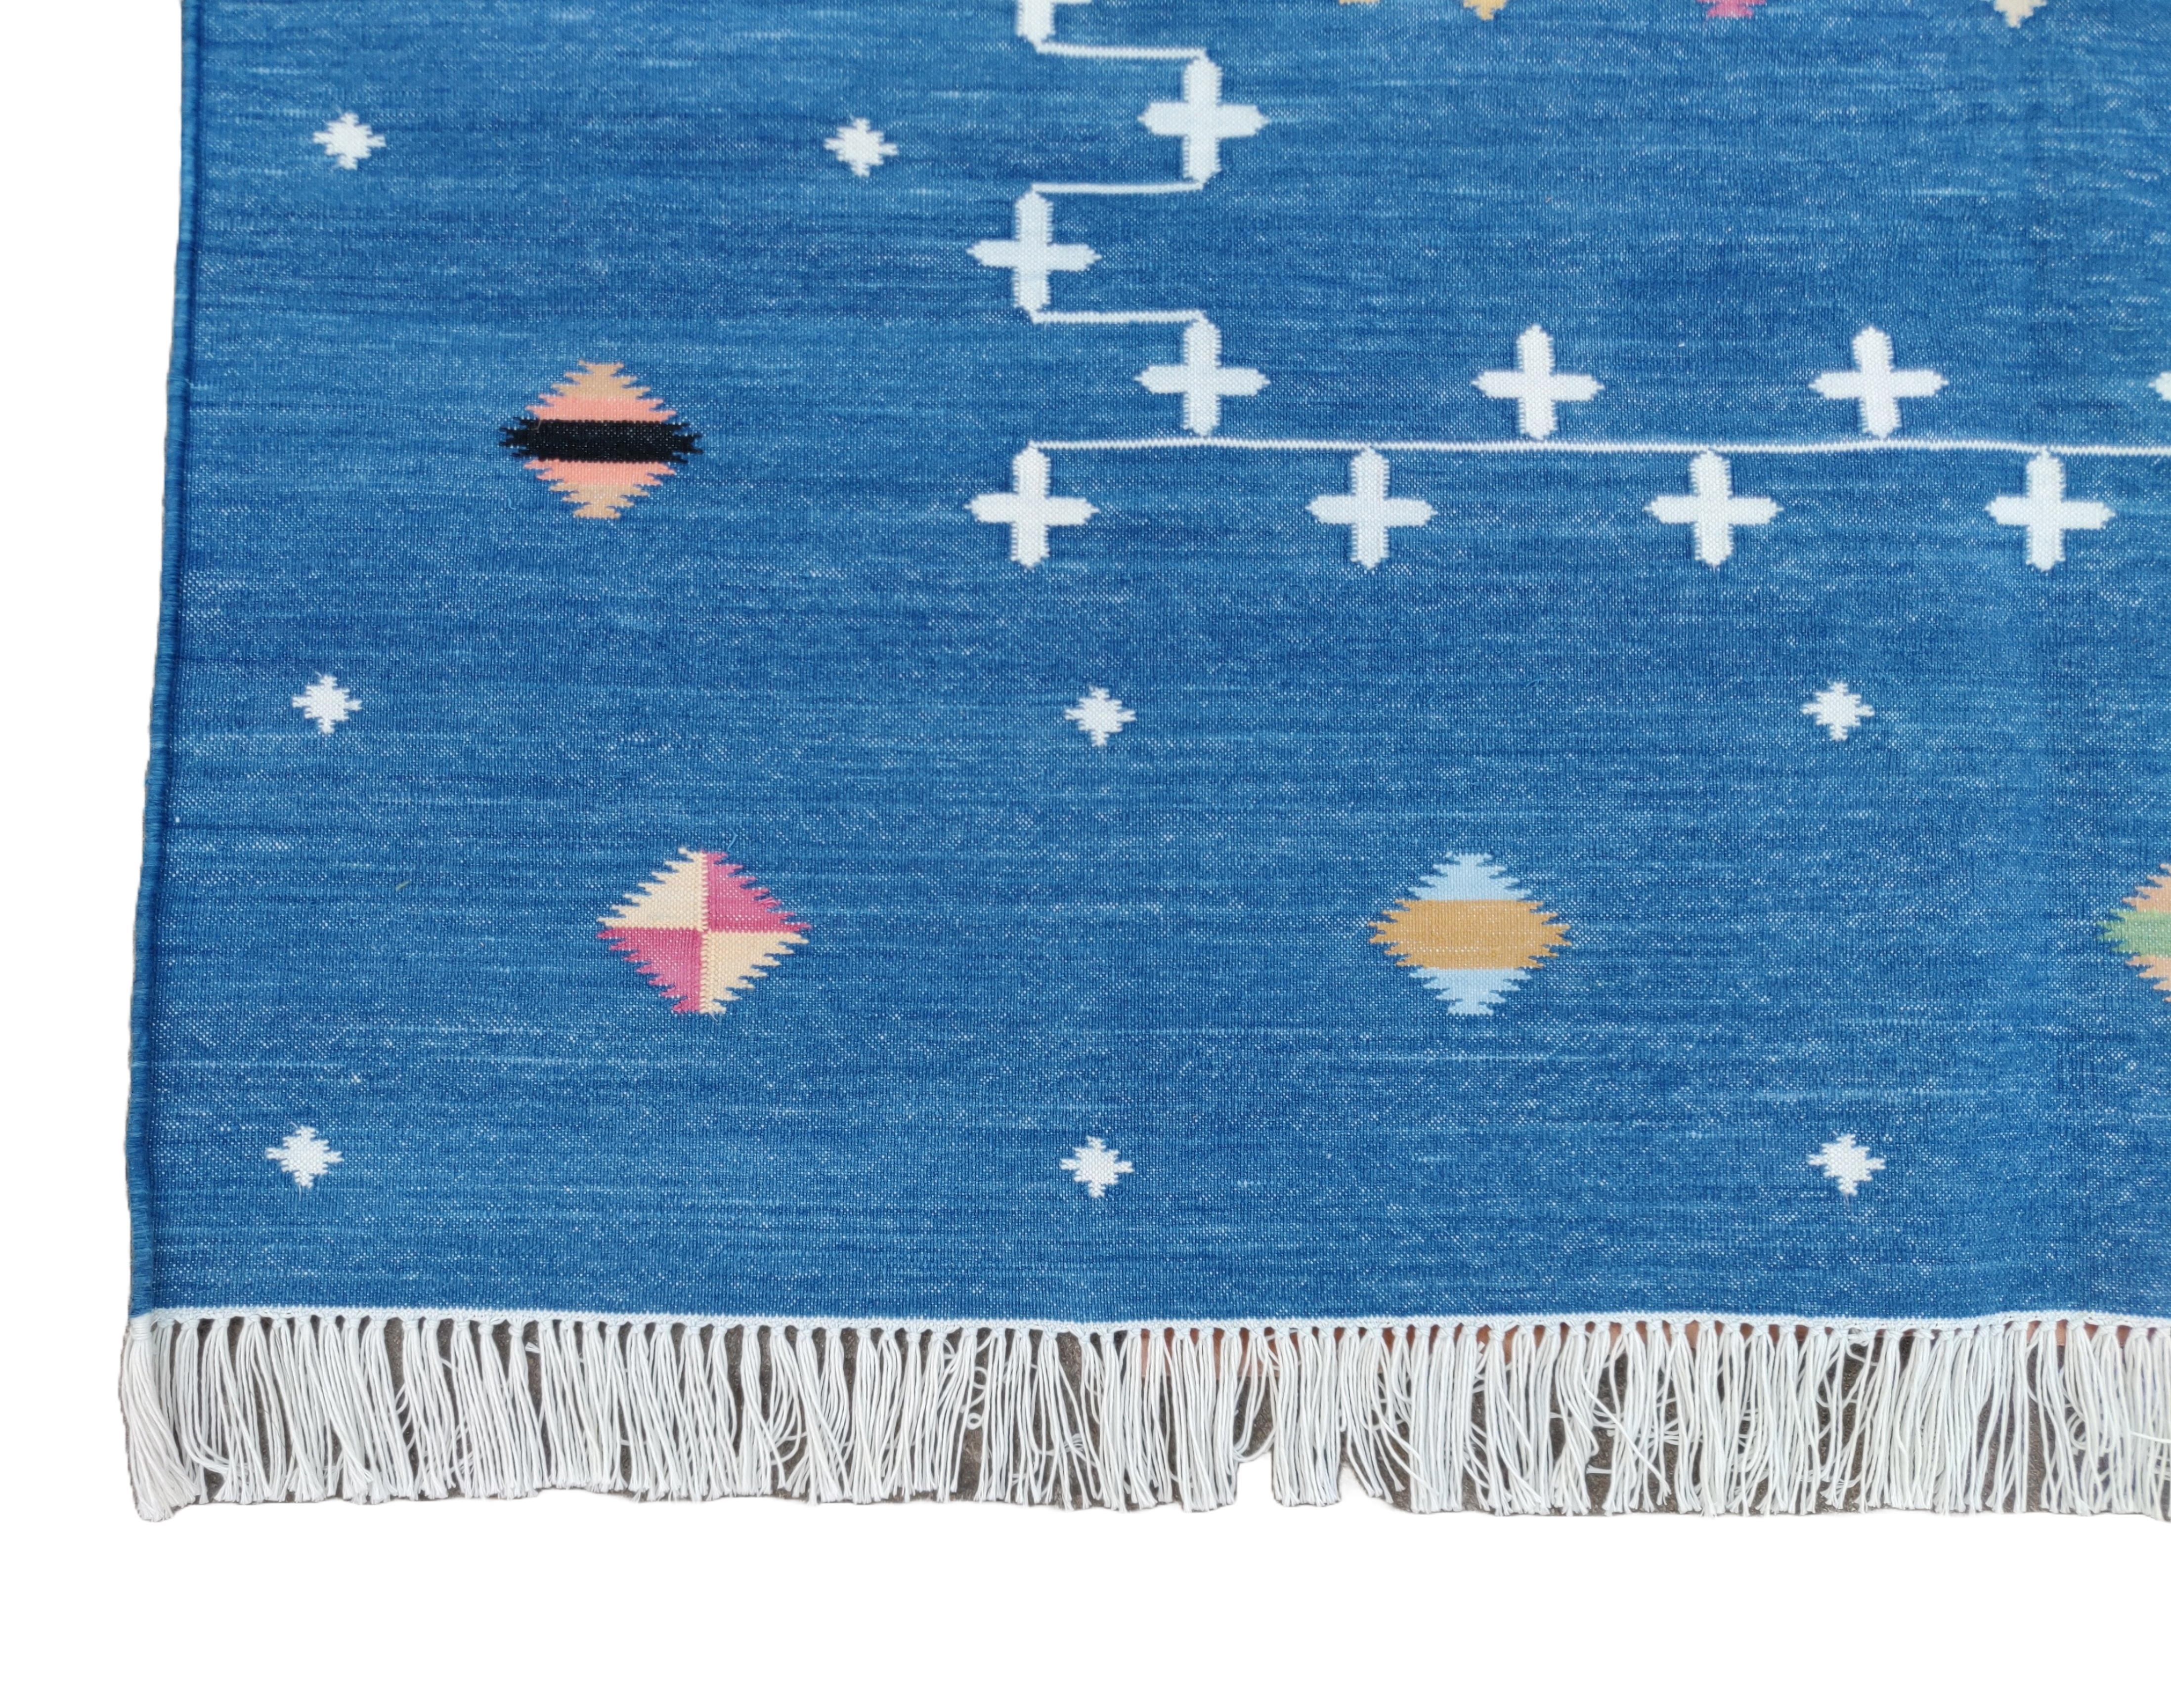 Kilim Handmade Cotton Area Flat Weave Rug, 9x12 Blue And White Shooting Star Dhurrie For Sale